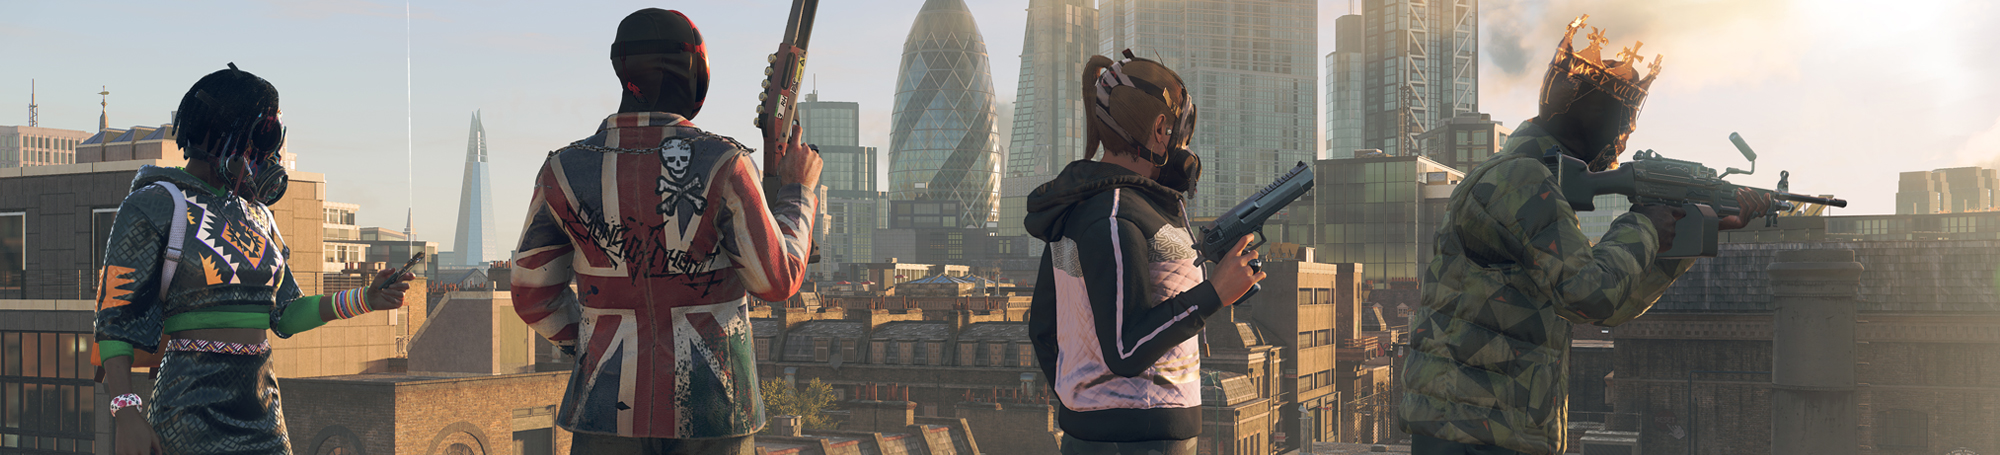 Four people holding guns looking out over a city